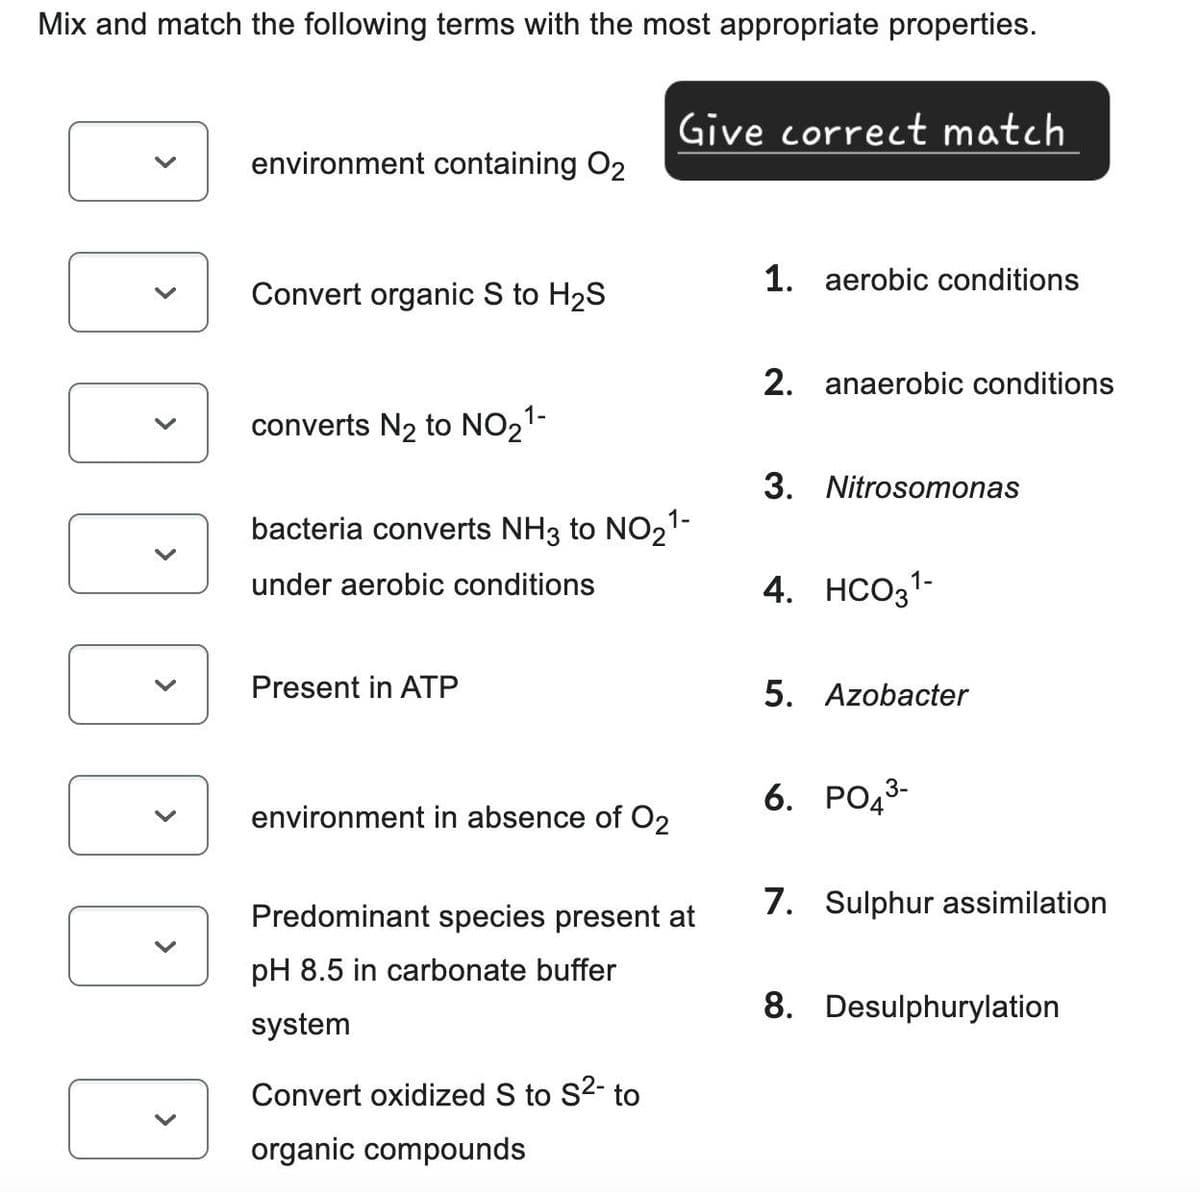 Mix and match the following terms with the most appropriate properties.
Give correct match
environment containing 02
1. aerobic conditions
Convert organic S to H2S
converts N2 to NO21-
bacteria converts NH3 to NO21-
under aerobic conditions
Present in ATP
2. anaerobic conditions
3. Nitrosomonas
4. HCO31-
5. Azobacter
environment in absence of O2
Predominant species present at
pH 8.5 in carbonate buffer
system
Convert oxidized S to S²- to
organic compounds
6. PO 3-
7. Sulphur assimilation
8. Desulphurylation